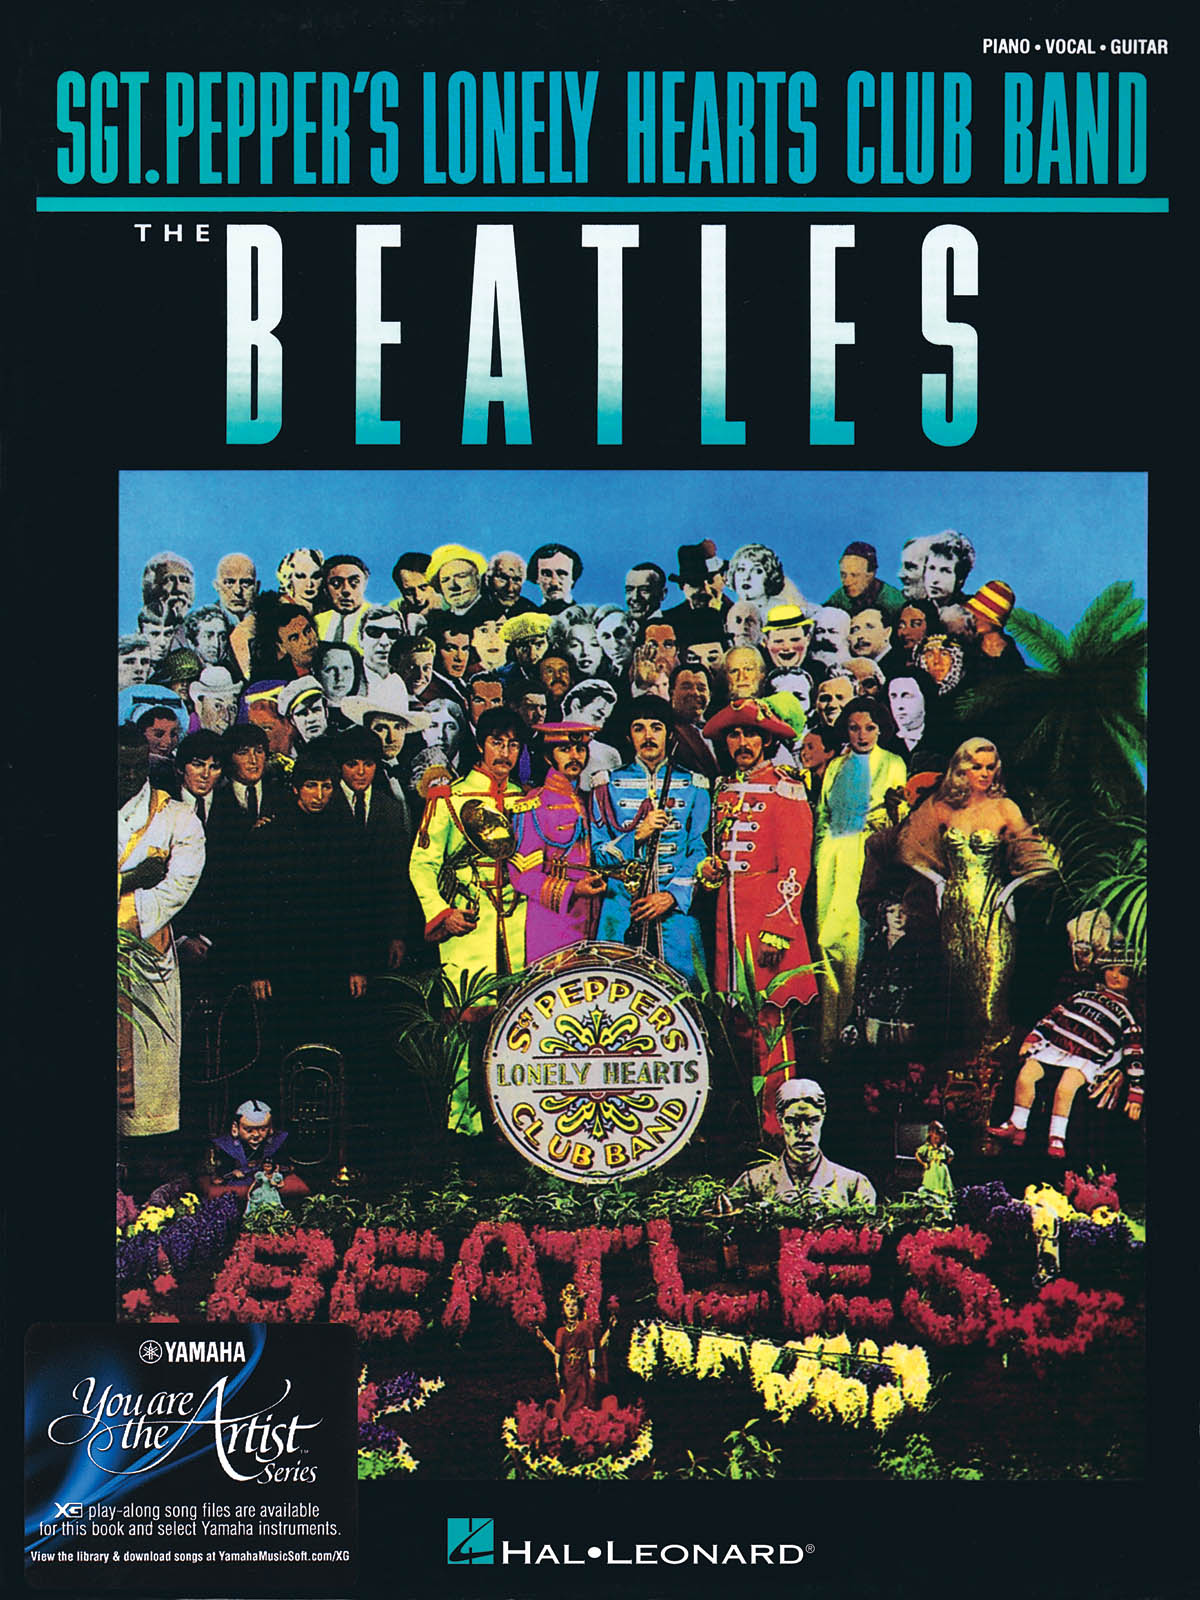 The Beatles –Sgt. Pepper’s Lonely Hearts Club Band